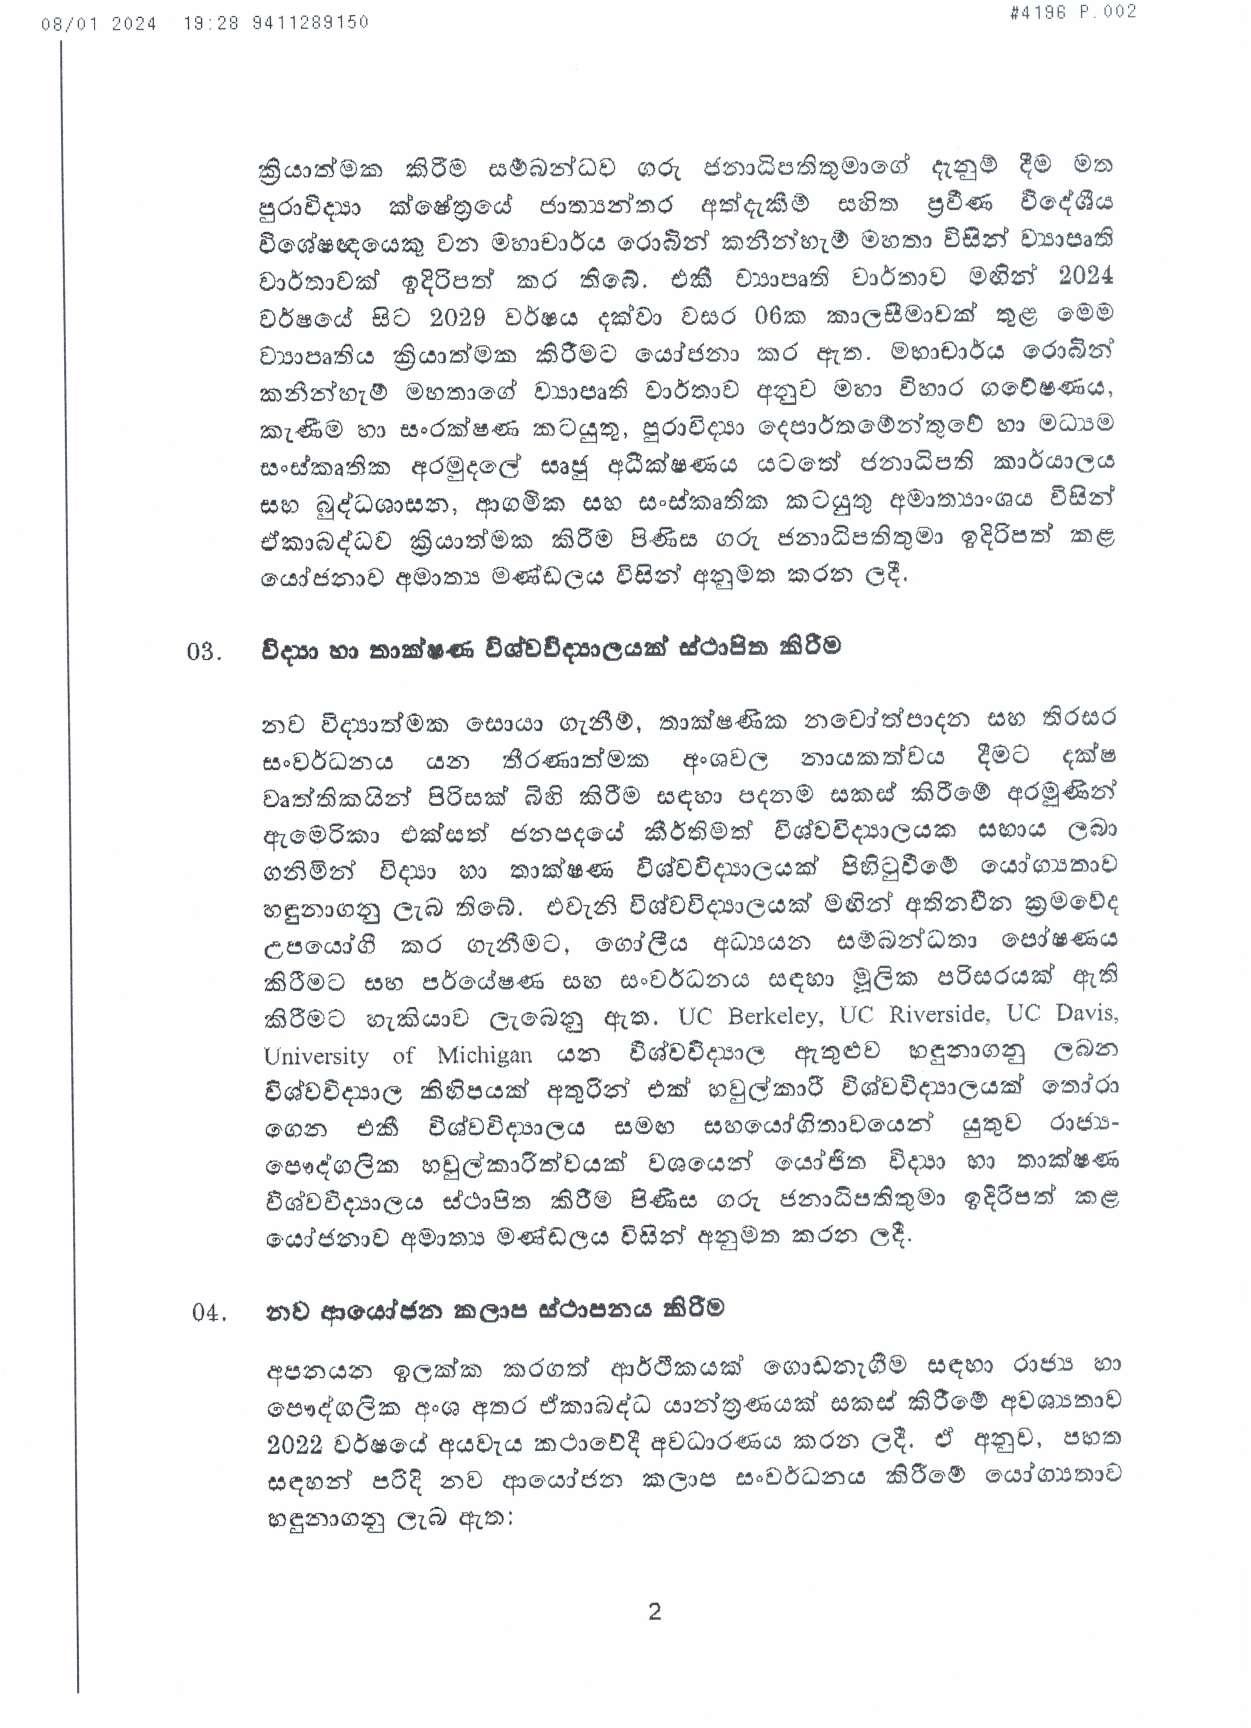 Cabinet Decision on 08.01.2024 page 002